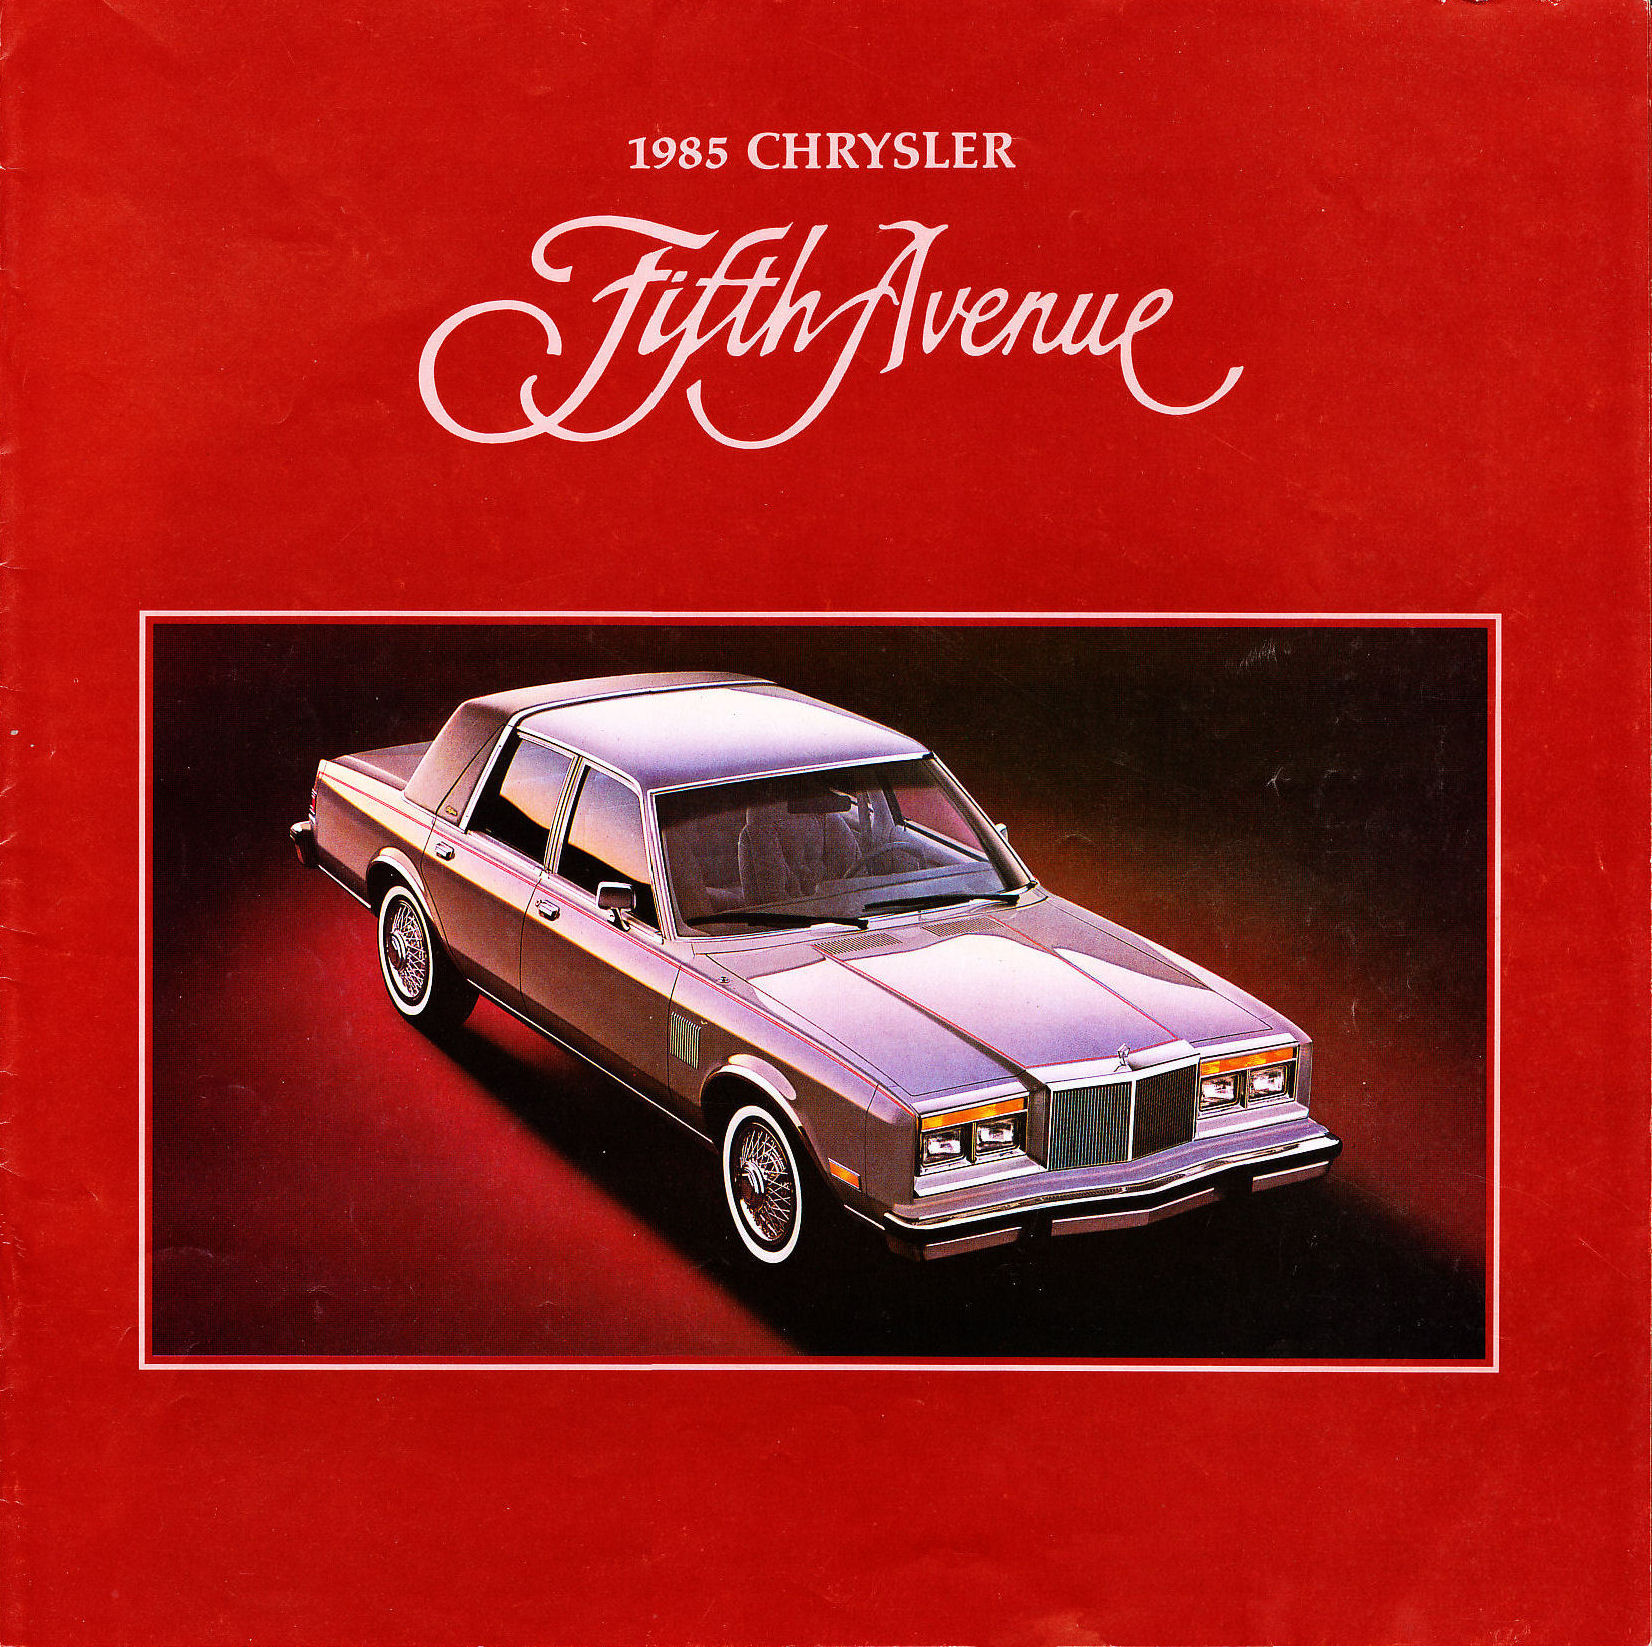 1985 Chrysler 5th Avenue Canadian Brochure Page 1